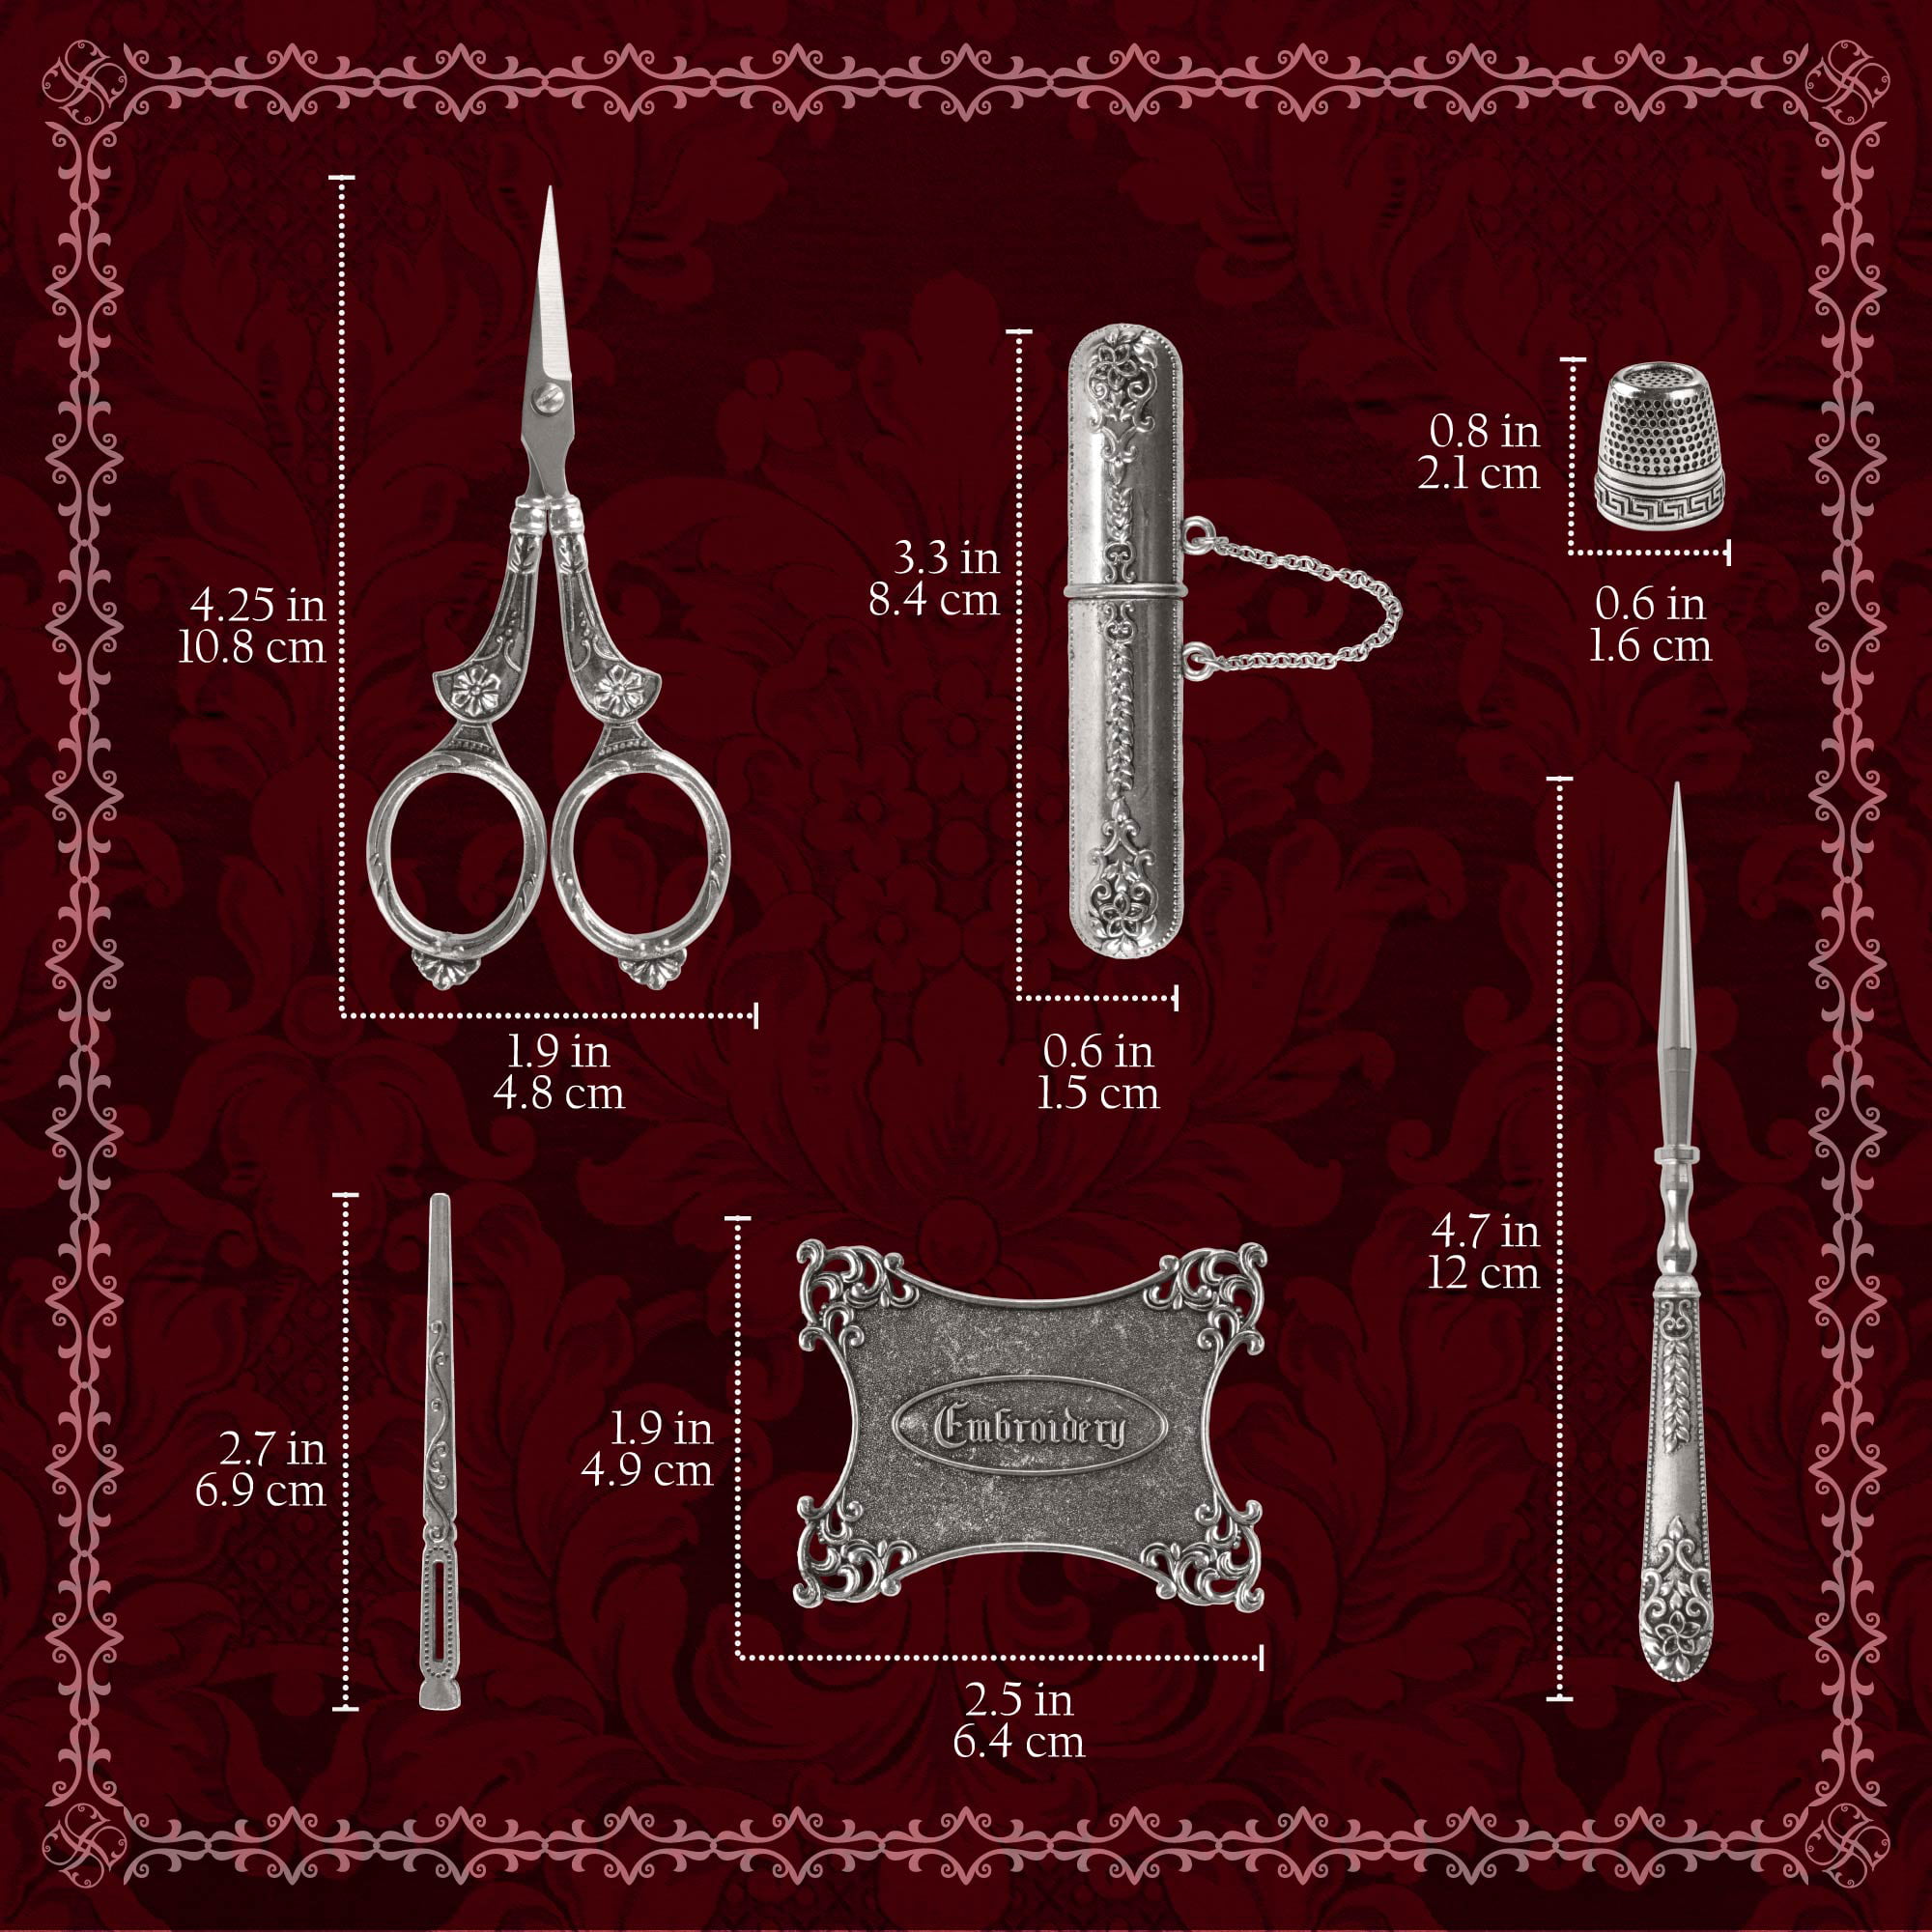  Embroidery Kits Include 2 Pairs Vintage Scissors, Sewing Needle  Case, Thimble, Threader, European Style Complete Sewing Kit for Embroidery,  Needlework (Red Copper) : Arts, Crafts & Sewing